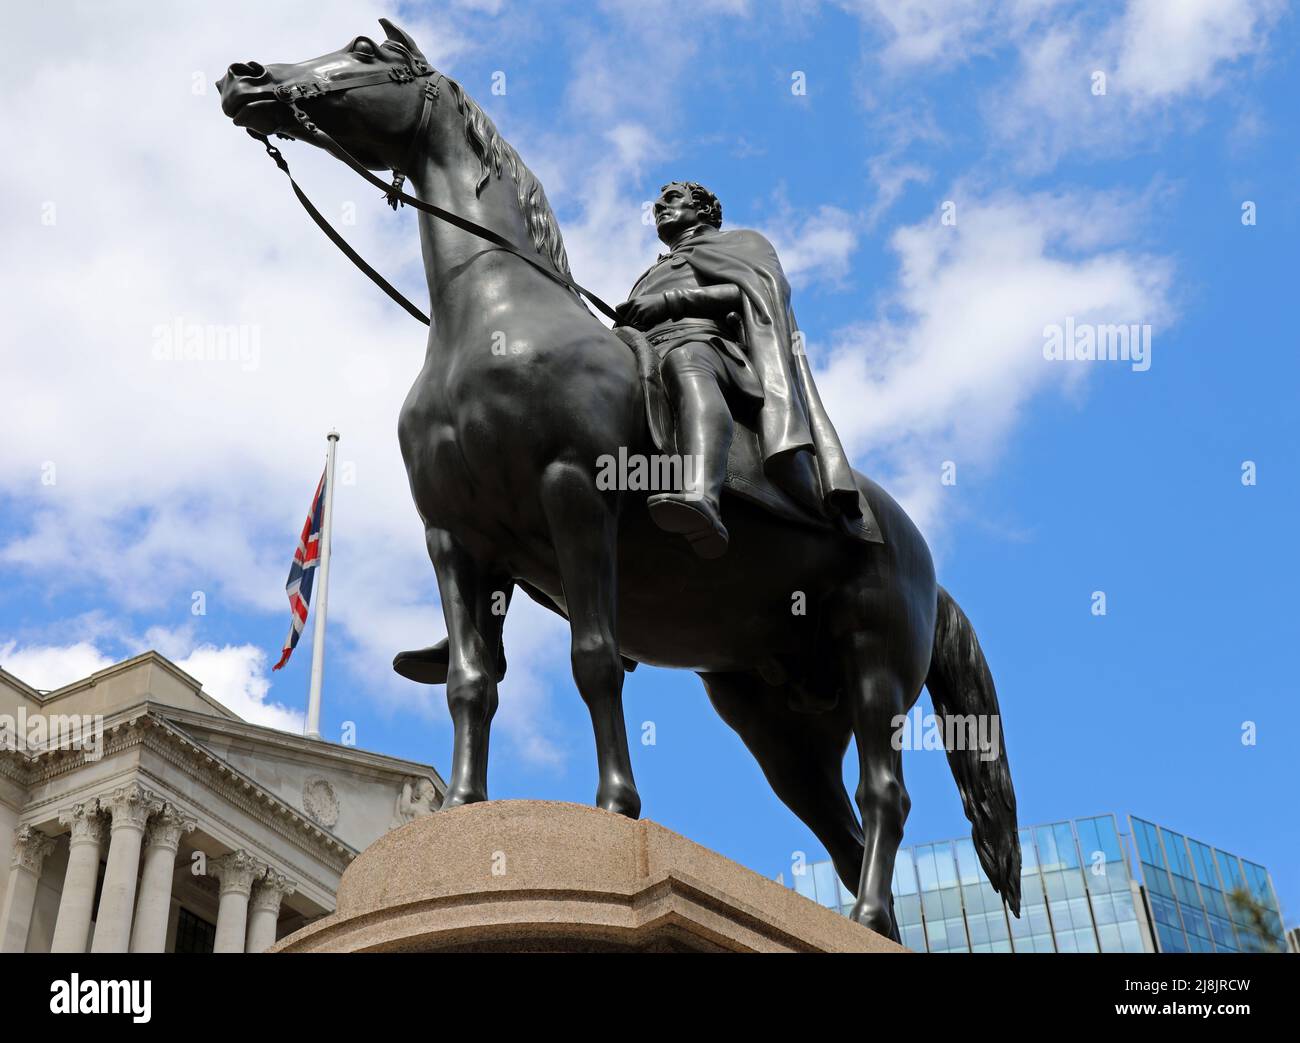 Equestrian statue of the 1st Duke of Wellington next to the Royal Exchange in London Stock Photo